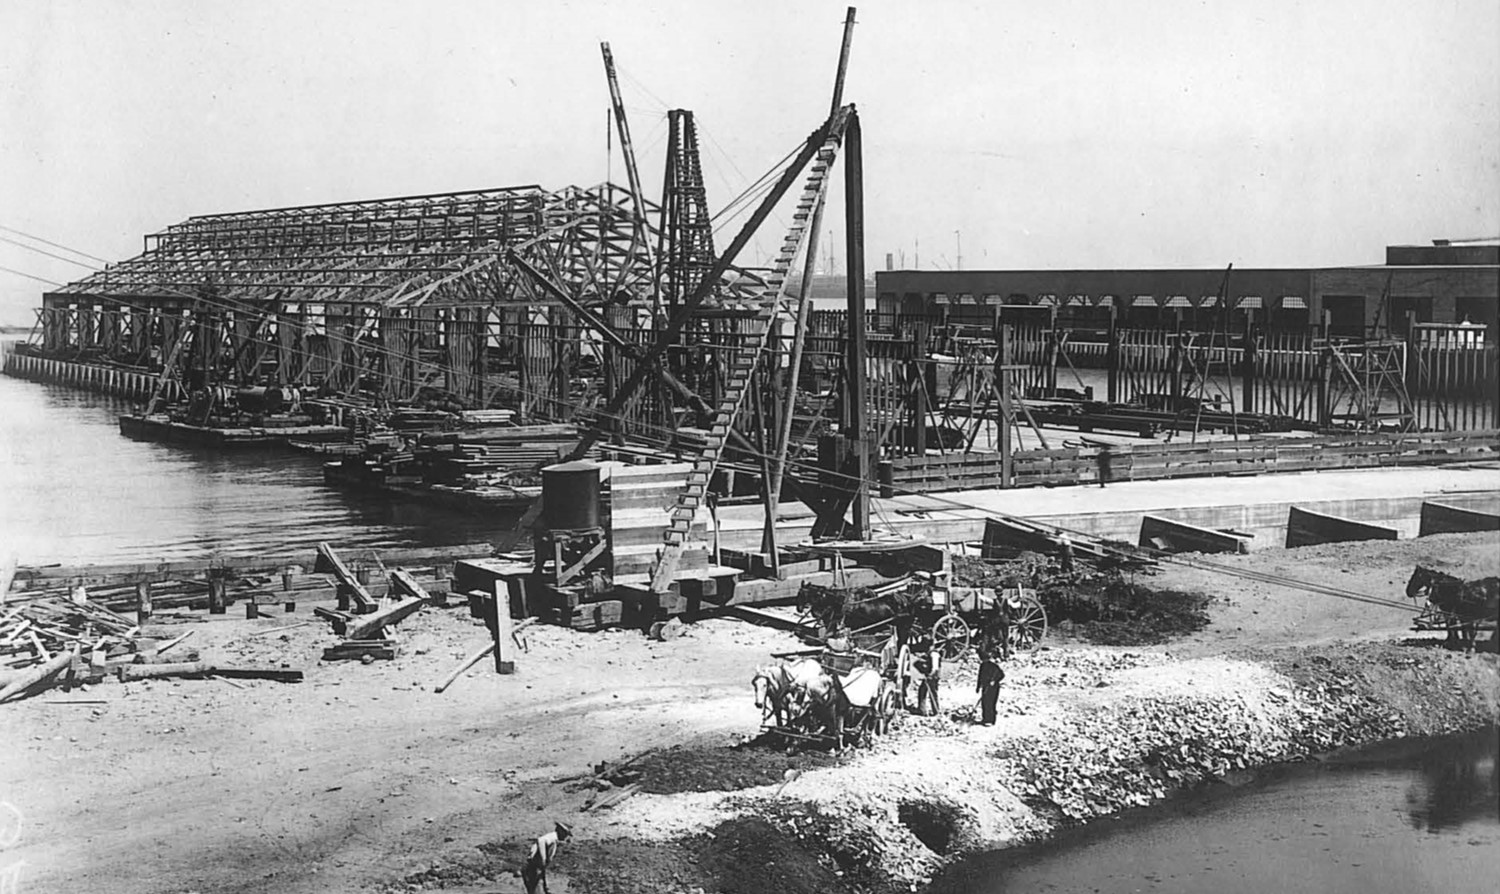 Construction of the Seawall